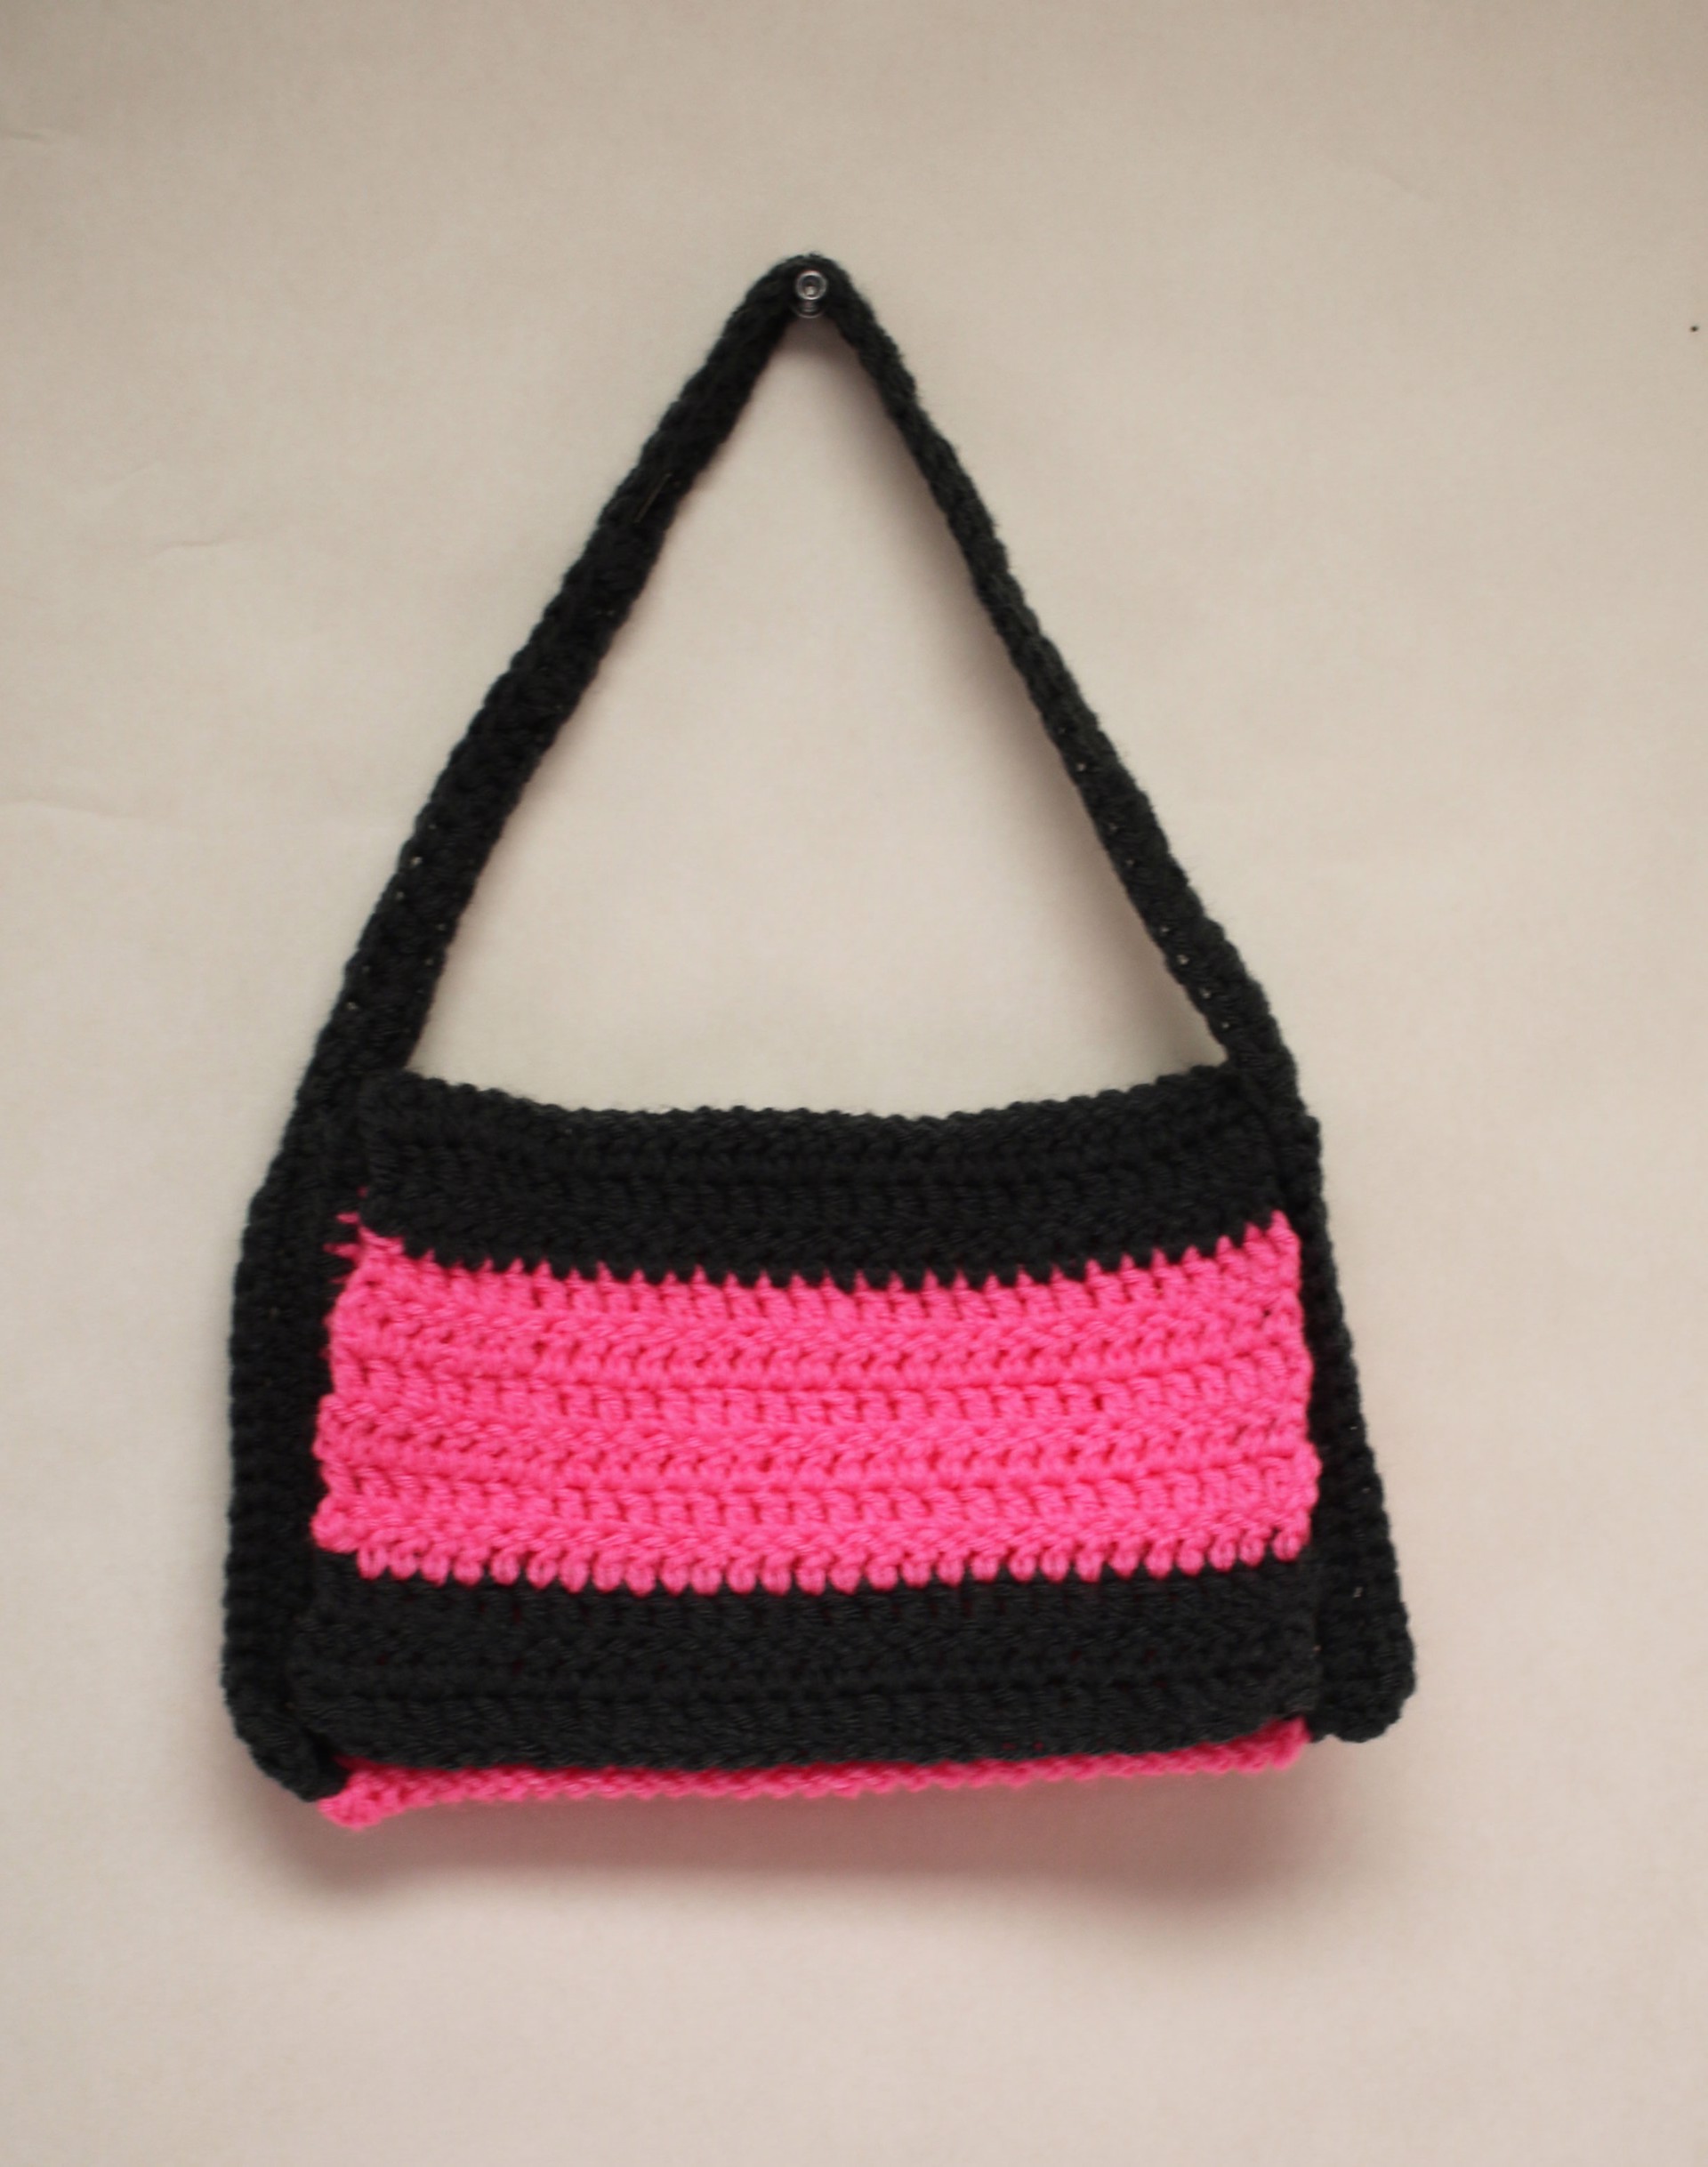 Crocheted Handbag by Luther Hampson